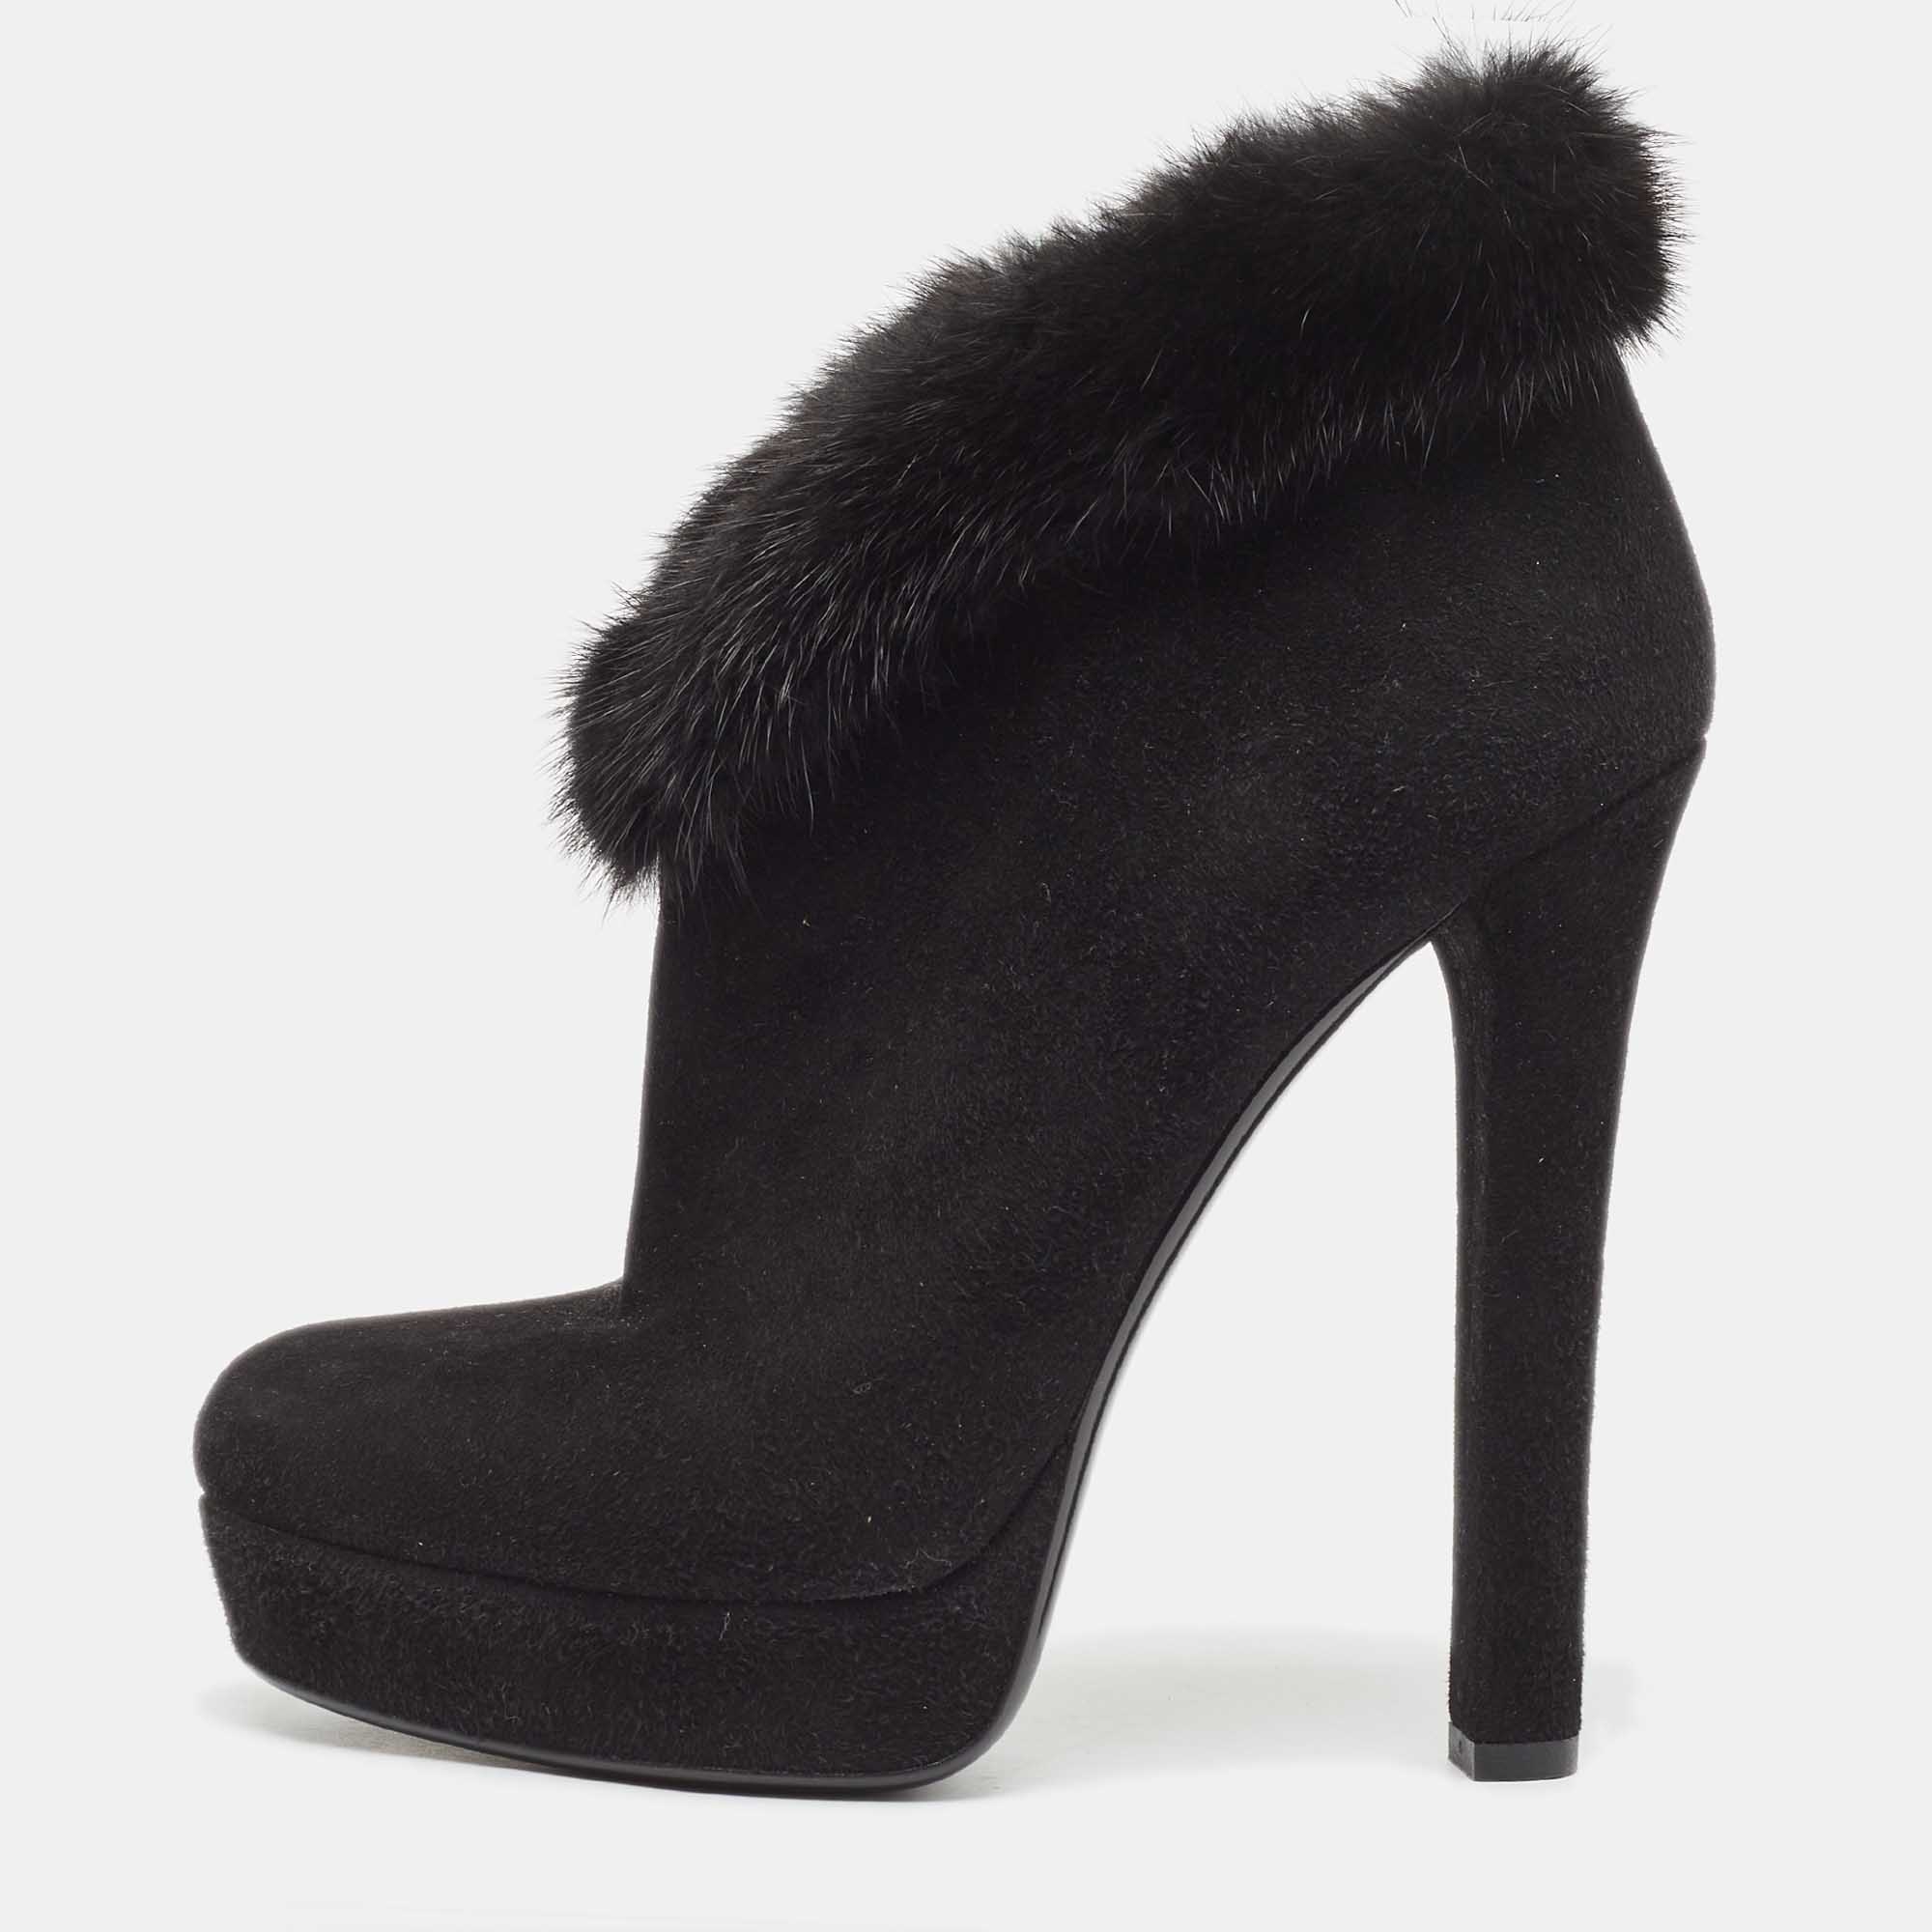 Gucci black suede and fur trim ankle boots size 37